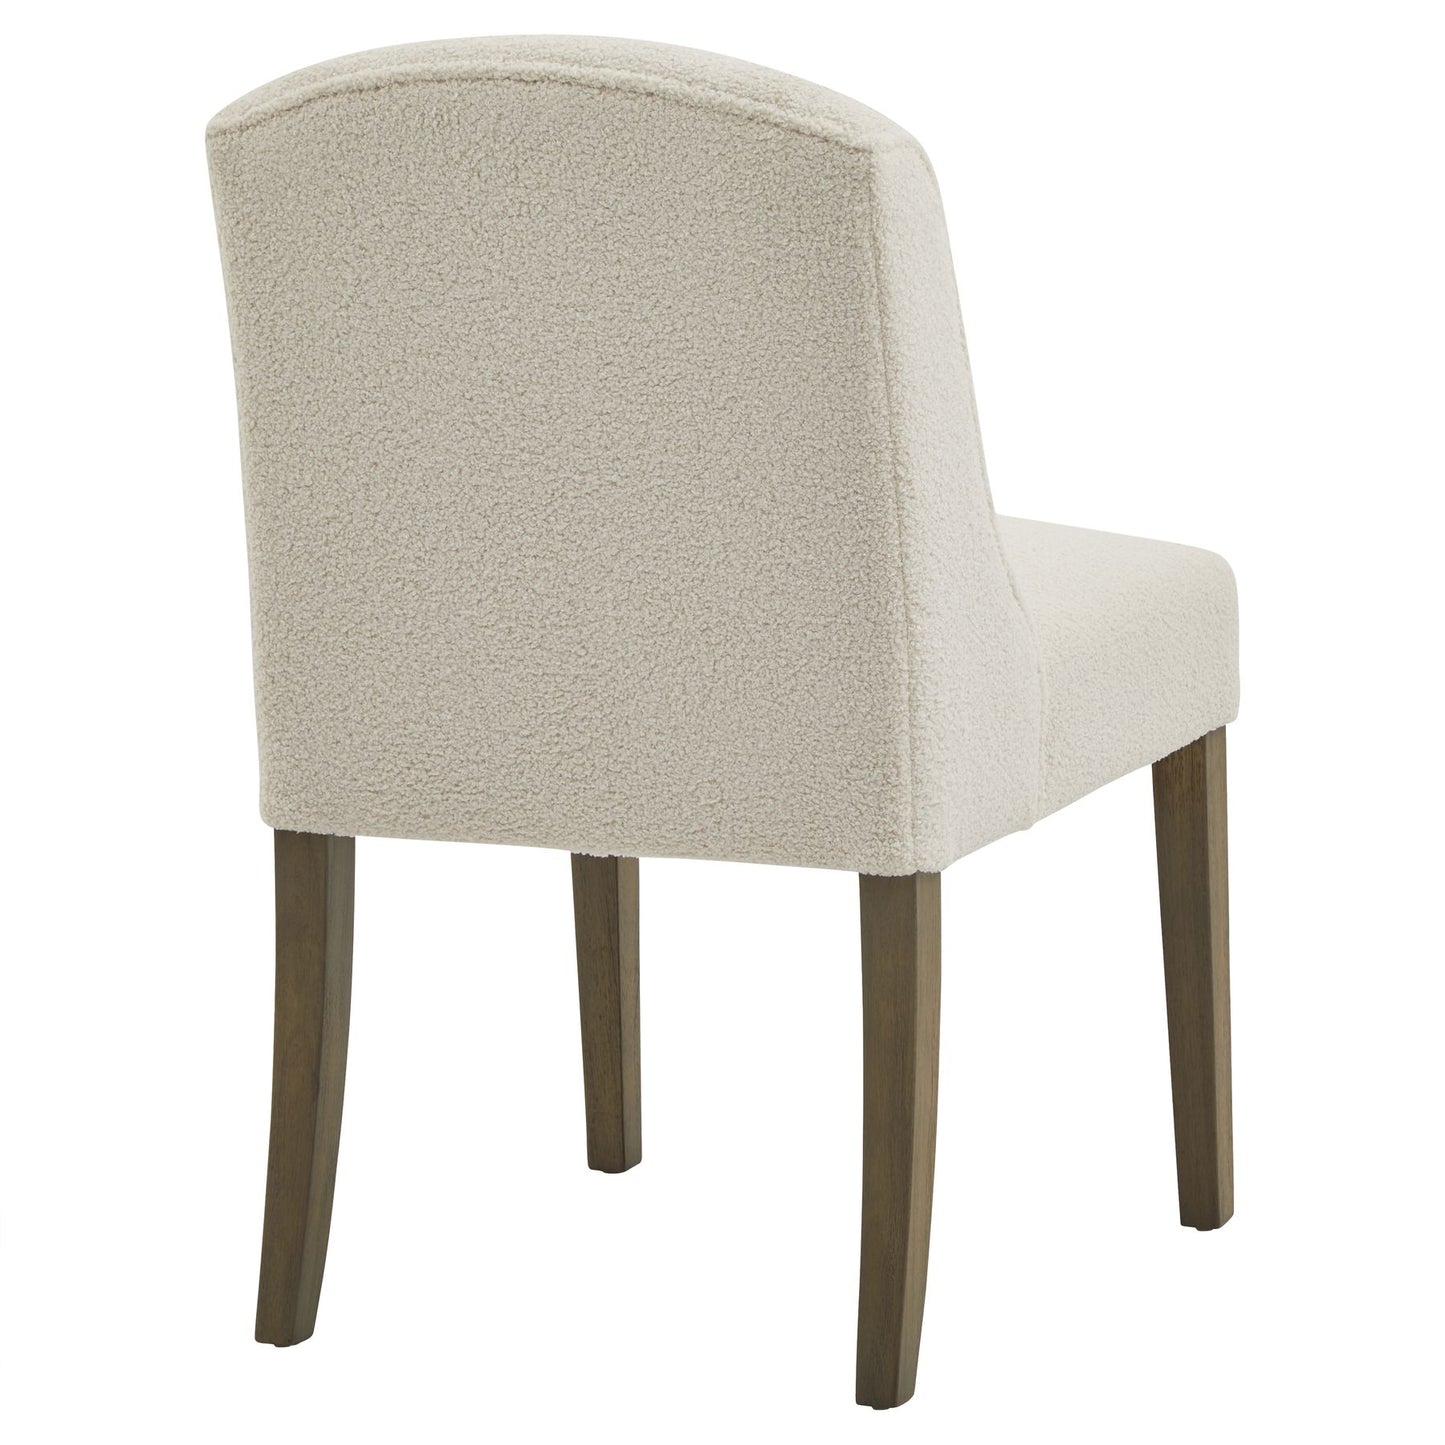 Compton Bouclé Dining Chair - PRE-ORDER FOR THE END OF JULY